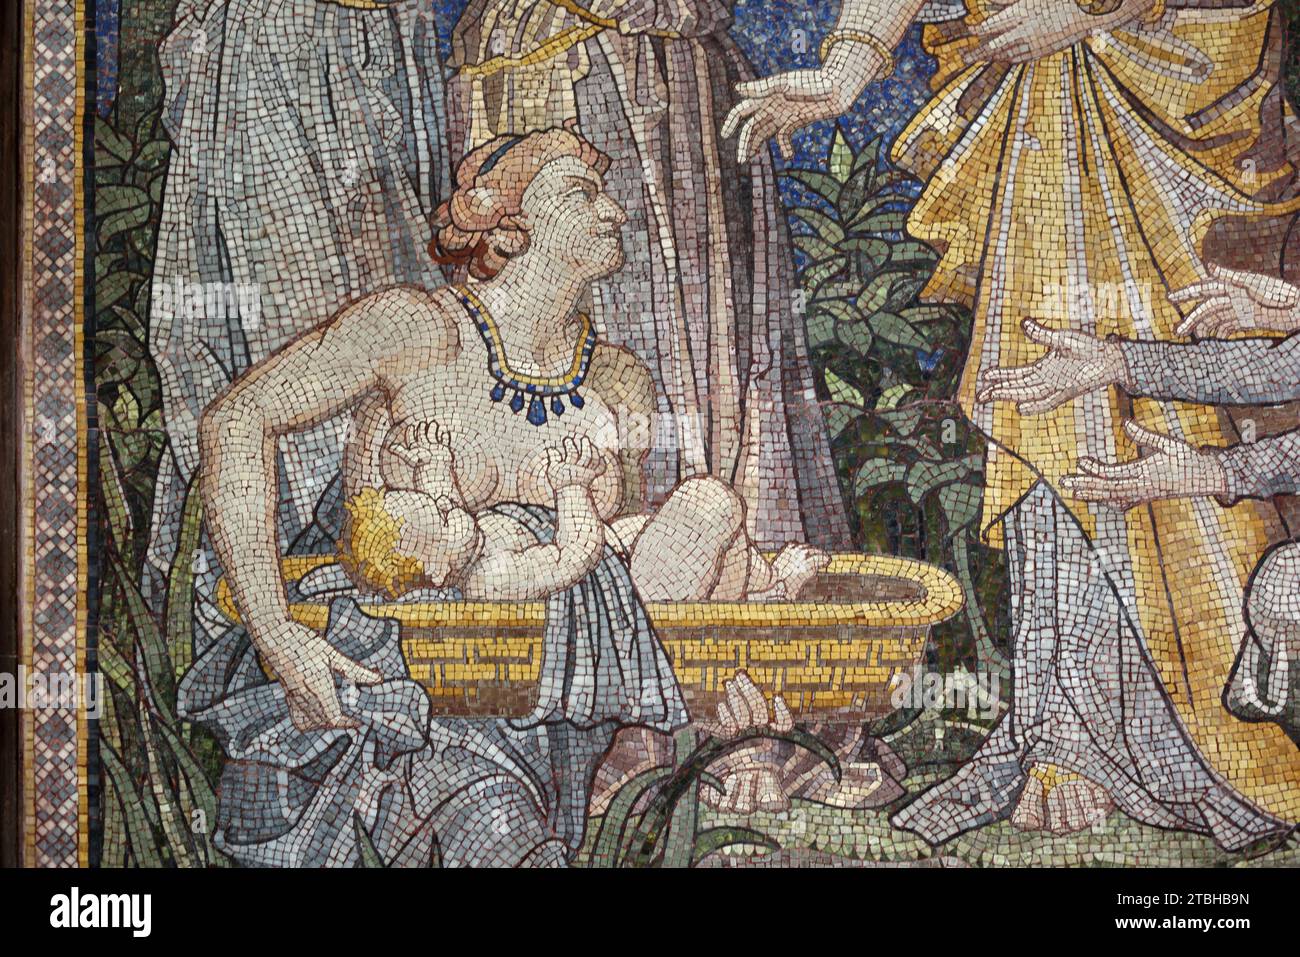 Finding of Moses in the River Nile by Pharaoh's Daughter from the Book of Exodus. Wall Mosaic in Chester Cathedral England UK Stock Photo